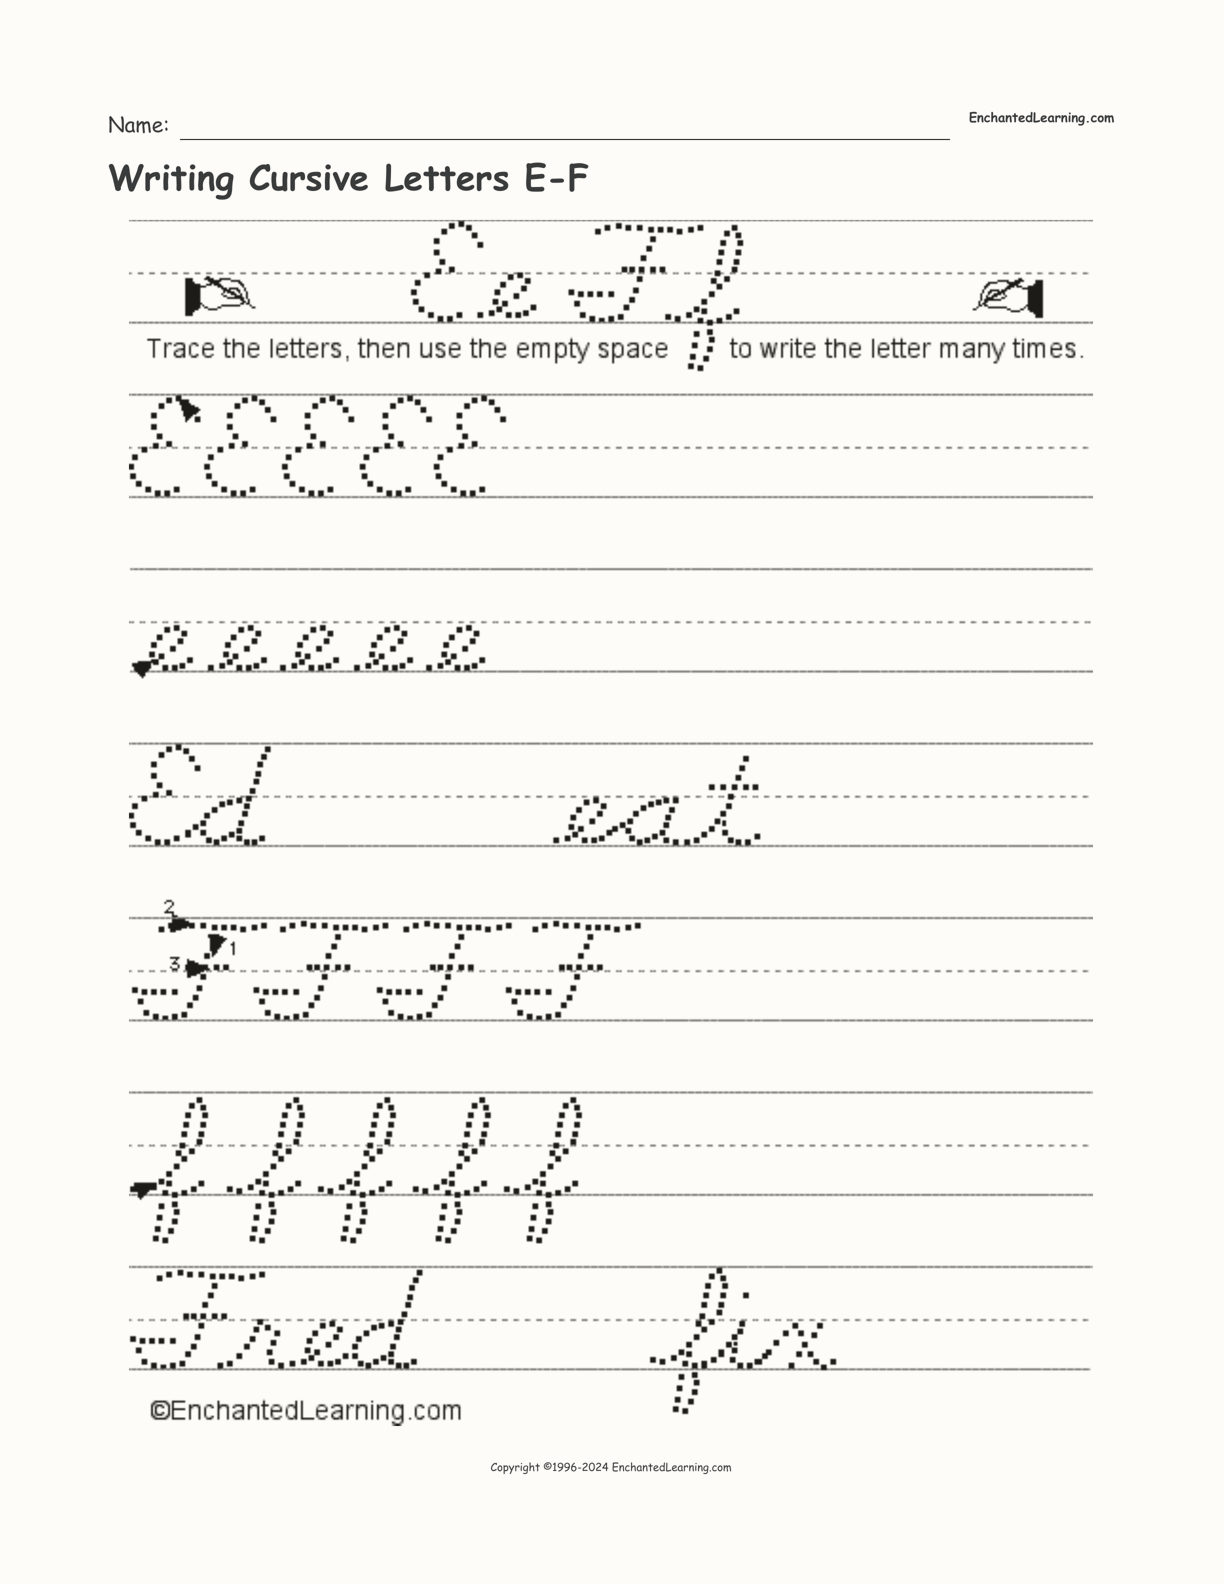 Writing Cursive Letters E-F interactive worksheet page 1